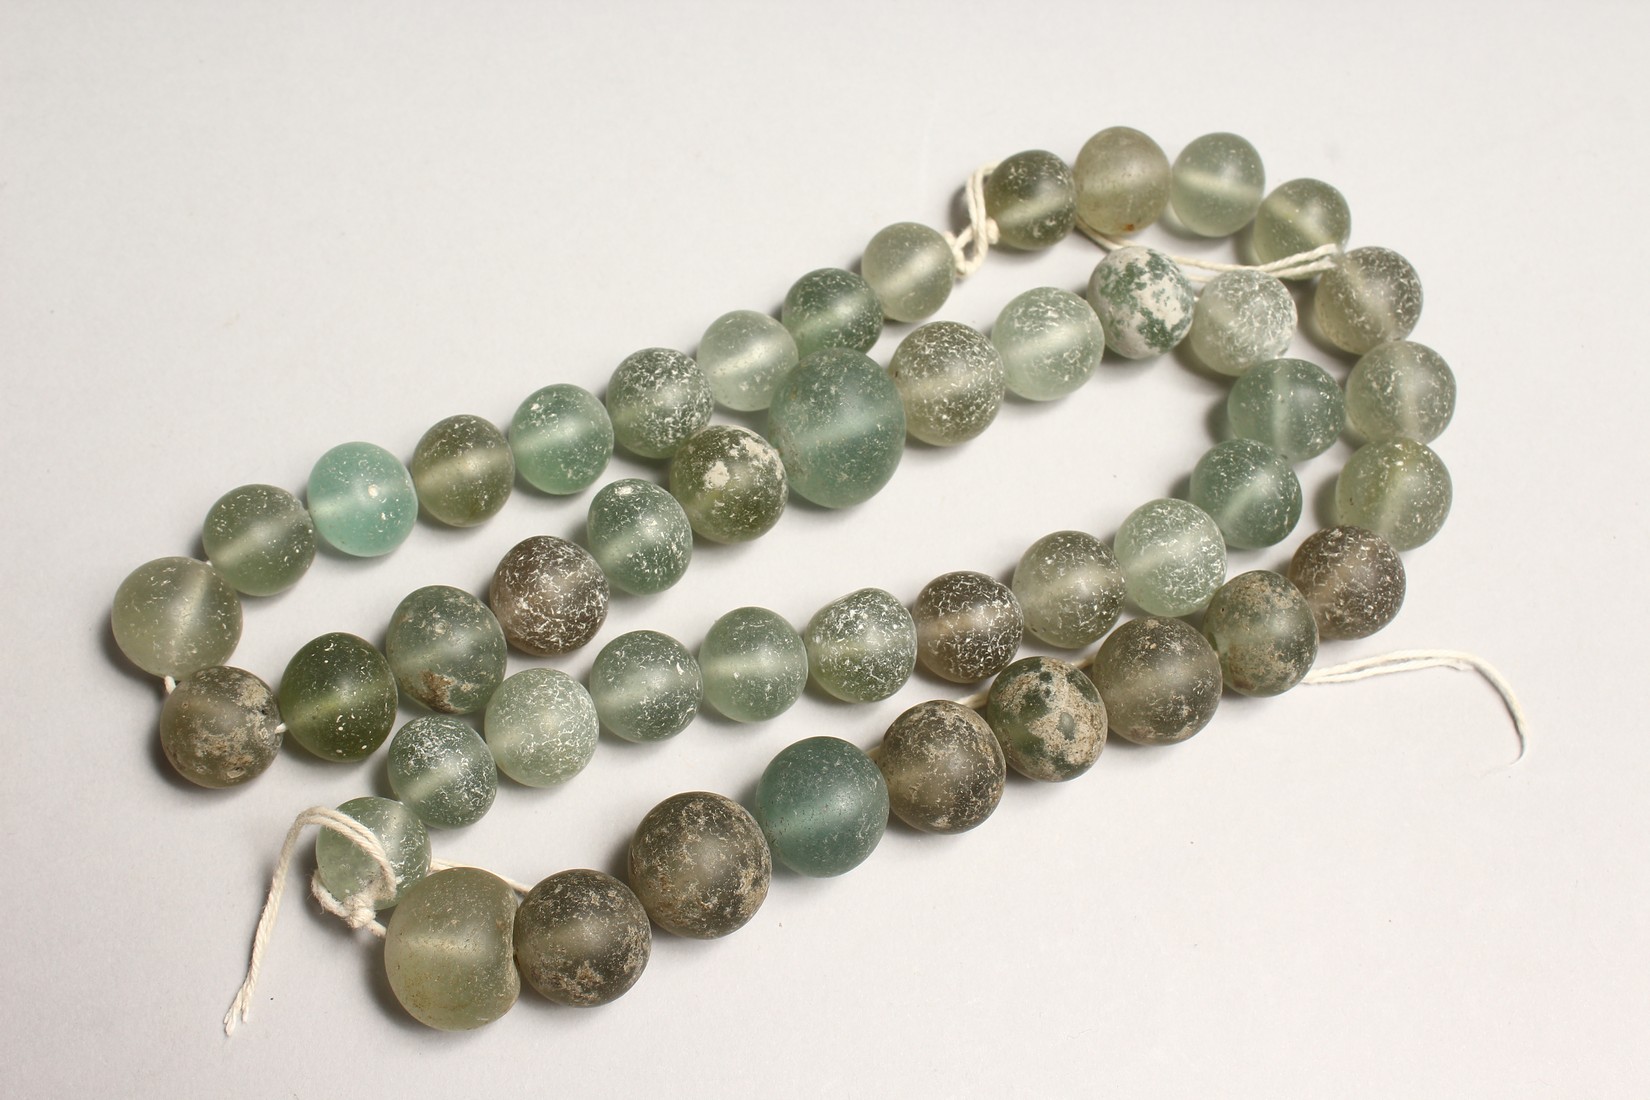 A SHIPWRECK GLASS BEAD NECKLACE - Image 3 of 3